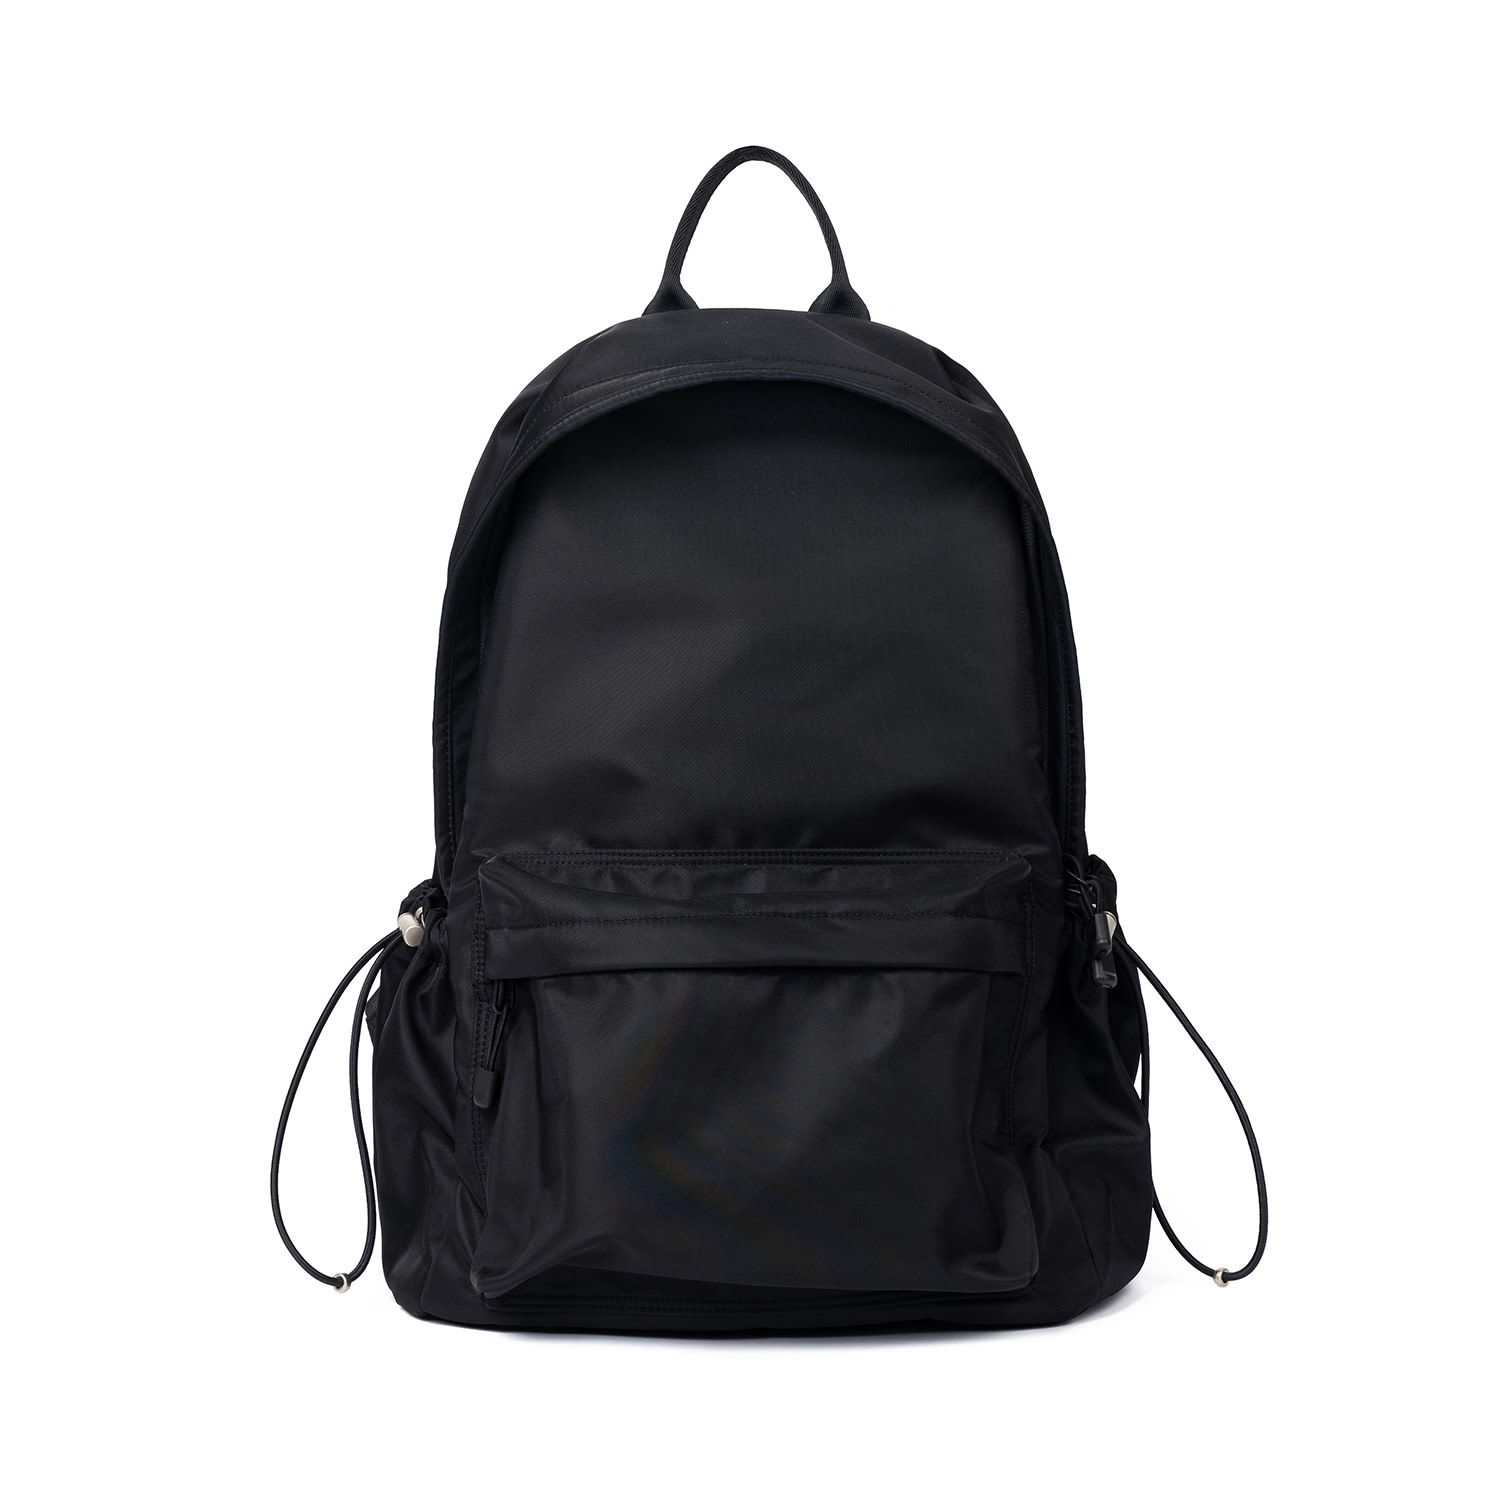 Women’s After Pray Edition New Port Backpack - Black Hah Archive